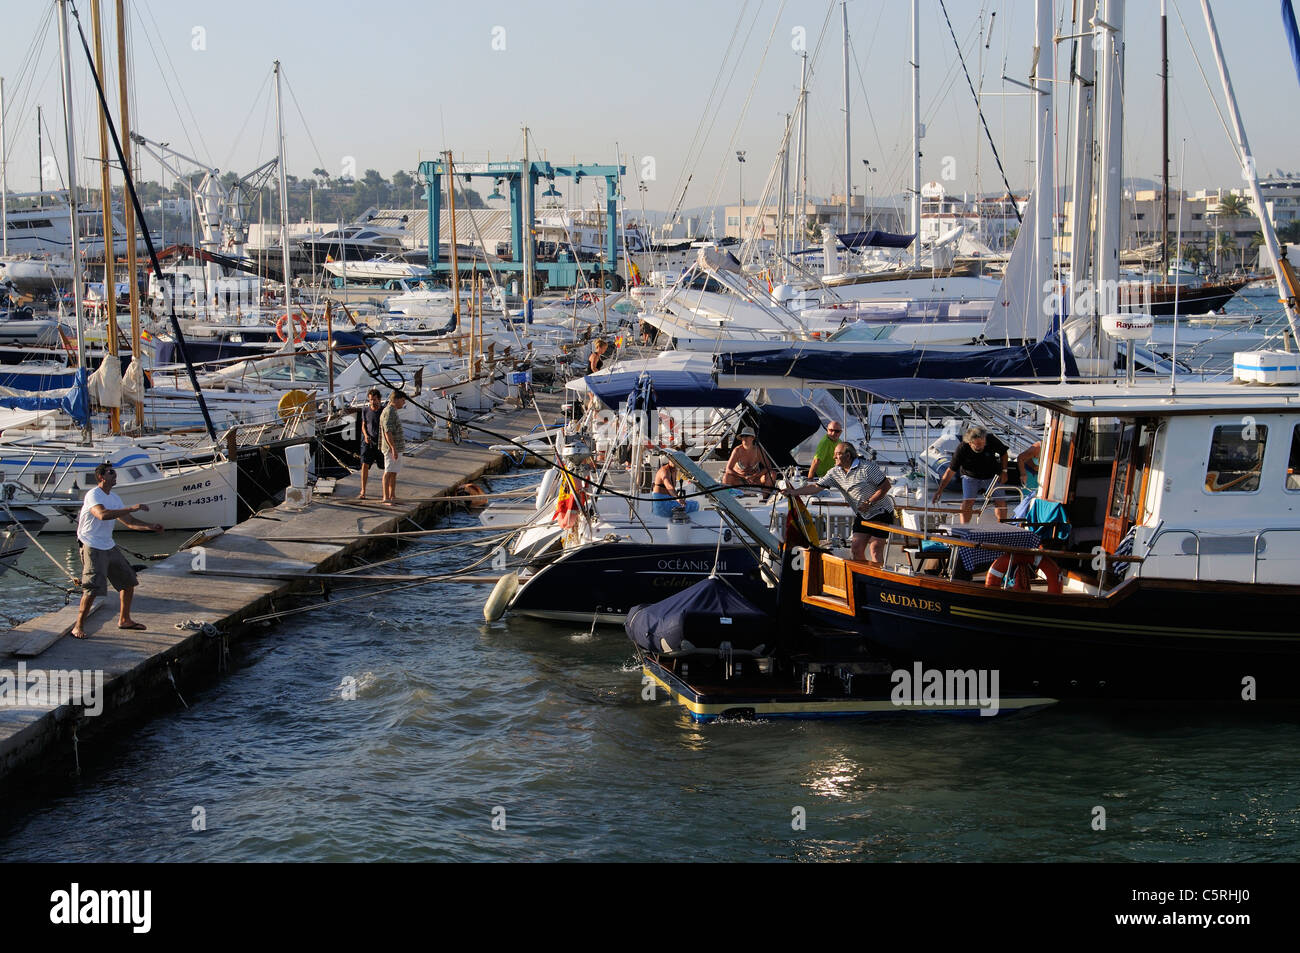 Eivissa, Ibiza, Spain, yachtsmen prepare to tie up in a marina as a rope is thrown Stock Photo